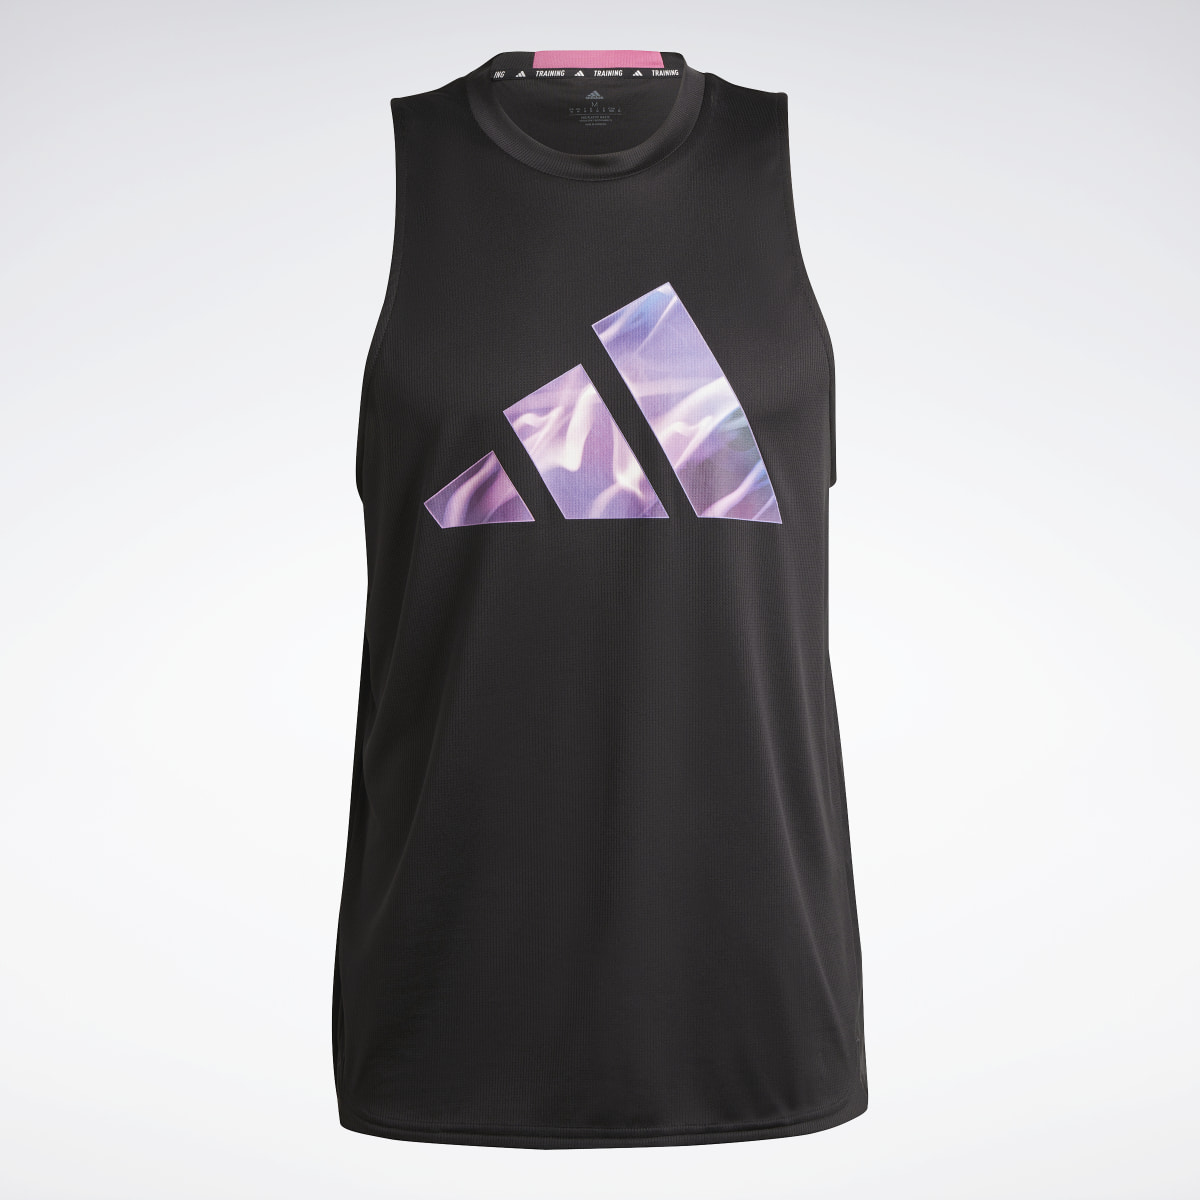 Adidas Designed for Movement HIIT Training Tank Top. 5